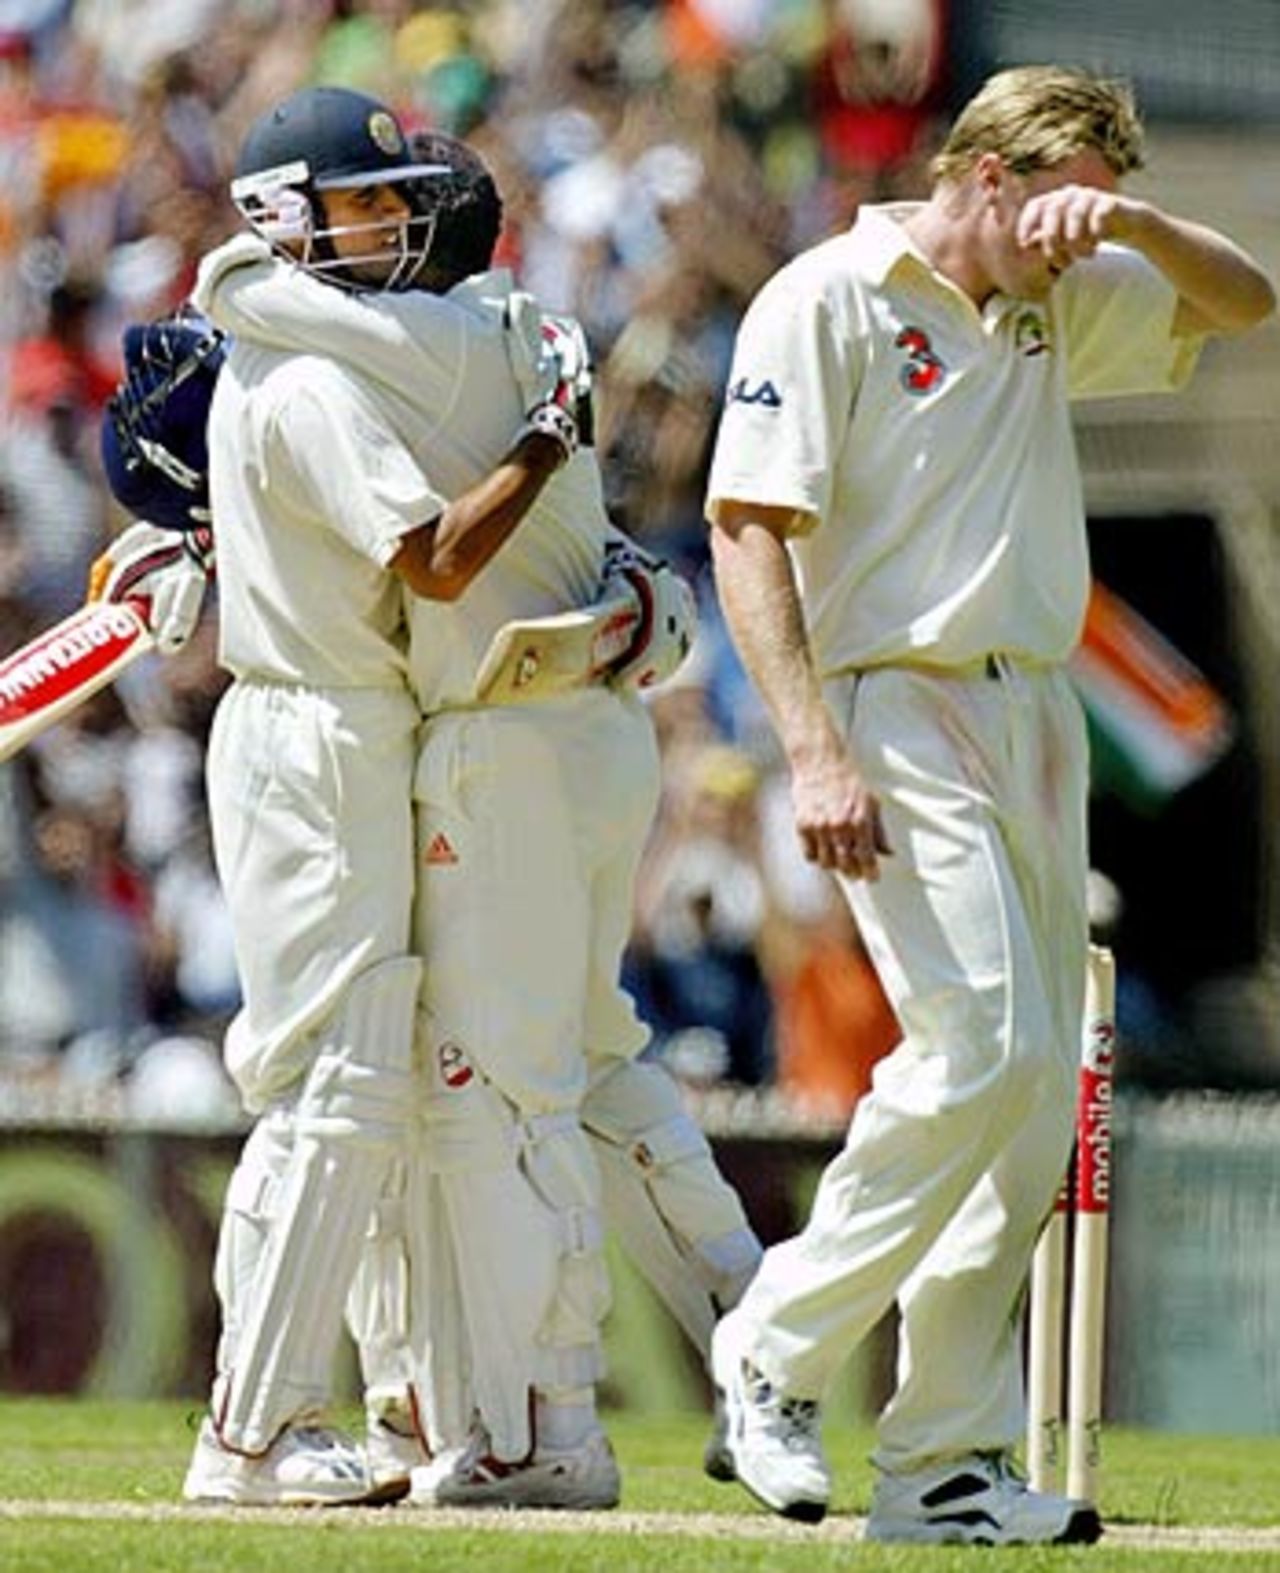 Adelaide's hero congratulates Melbourne's hero. Rahul Dravid was visibly delighted when Virender Sehwag reached his hundred, Australia v India, 3rd Test, Melbourne, 1st day, December 26, 2003